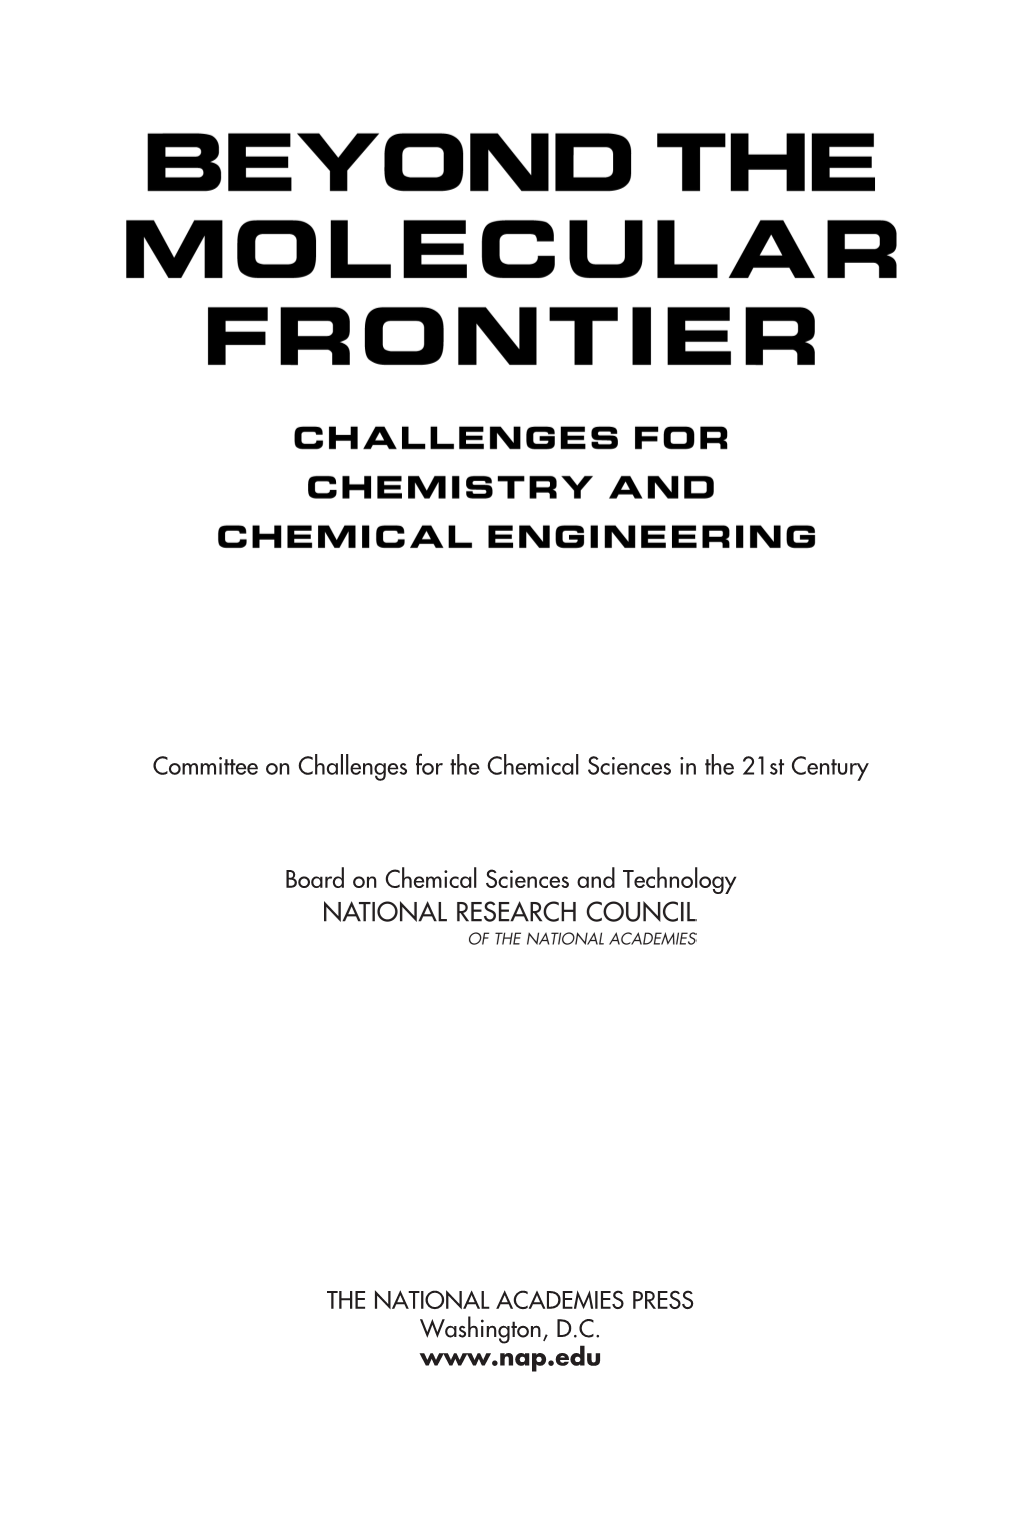 Beyond the Molecular Frontier: Challenges for Chemistry and Chemical Engineering Presents an Overview